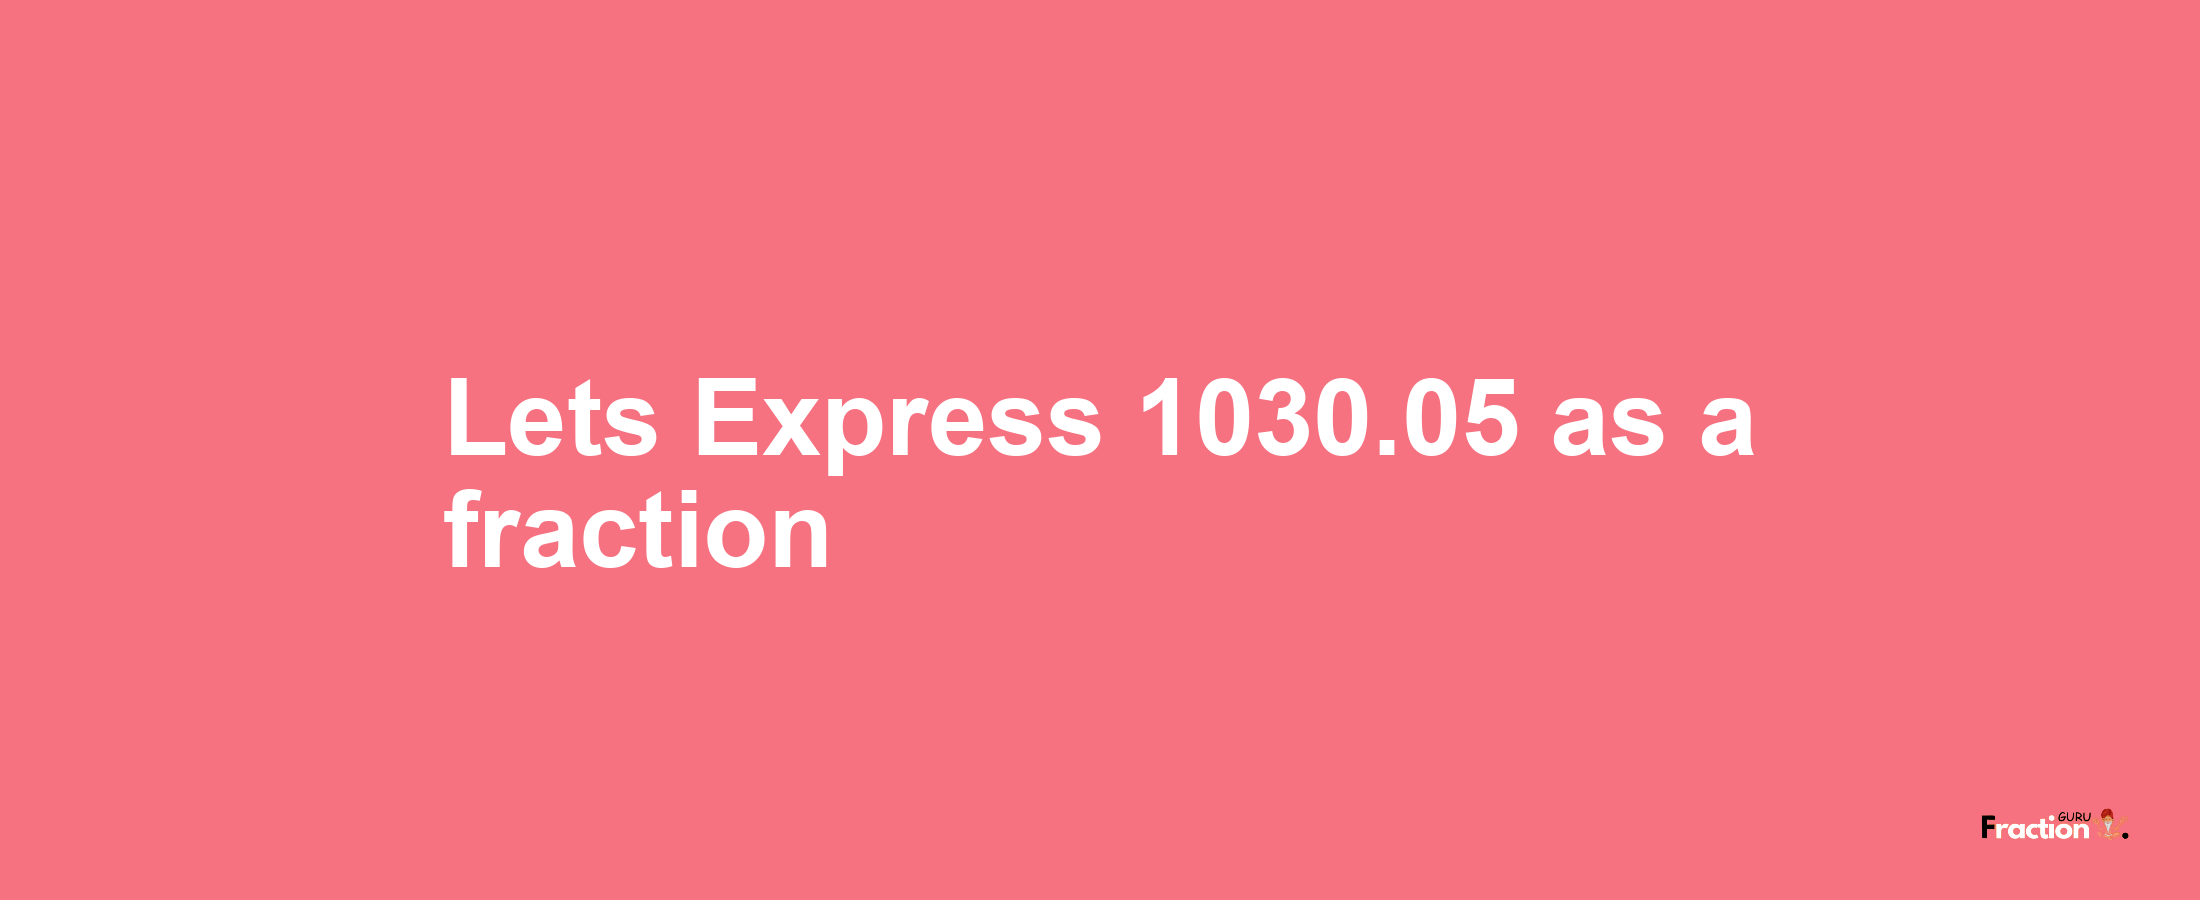 Lets Express 1030.05 as afraction